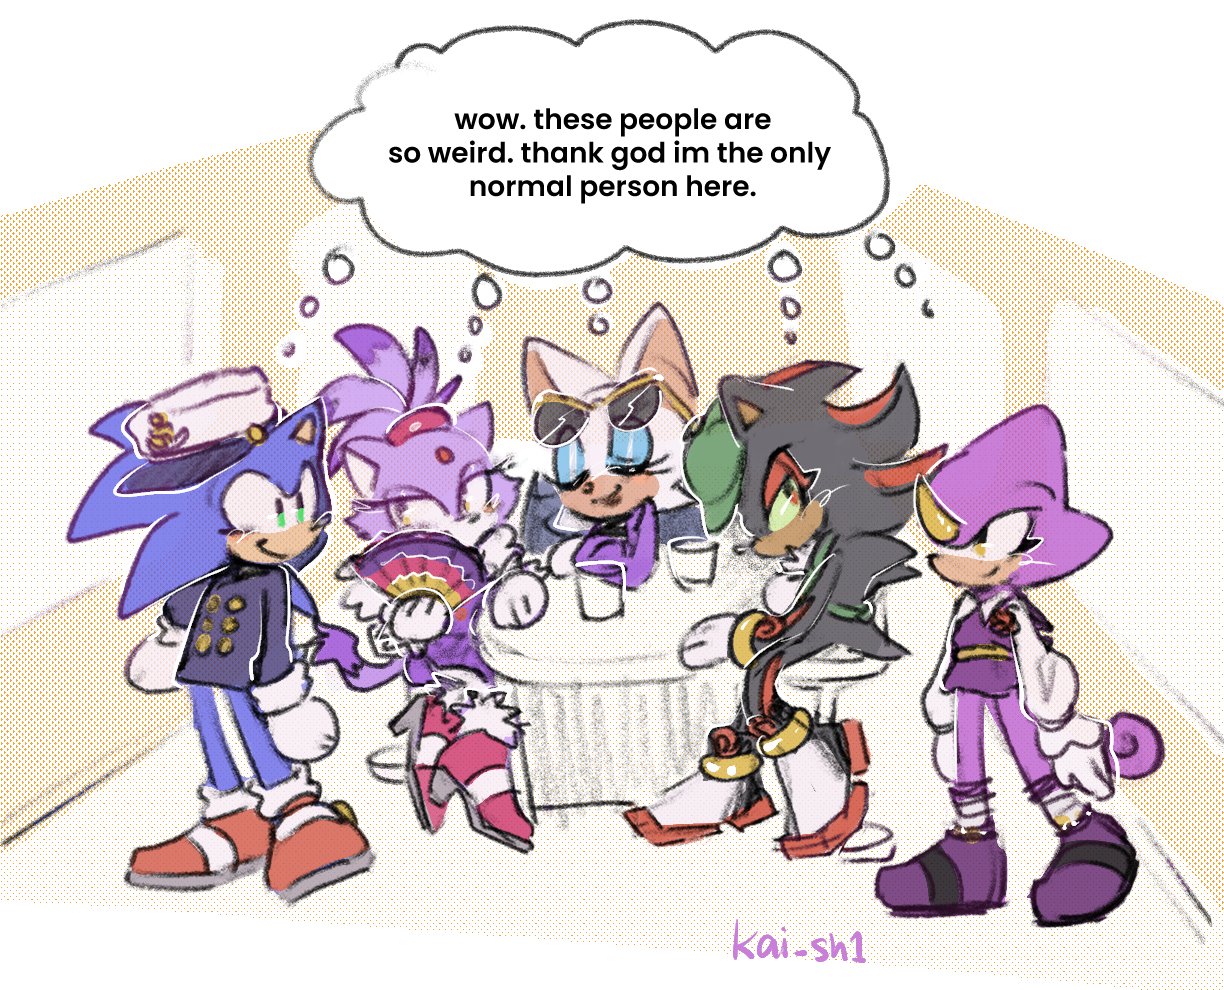 All posts by SONICBOY817-KAI